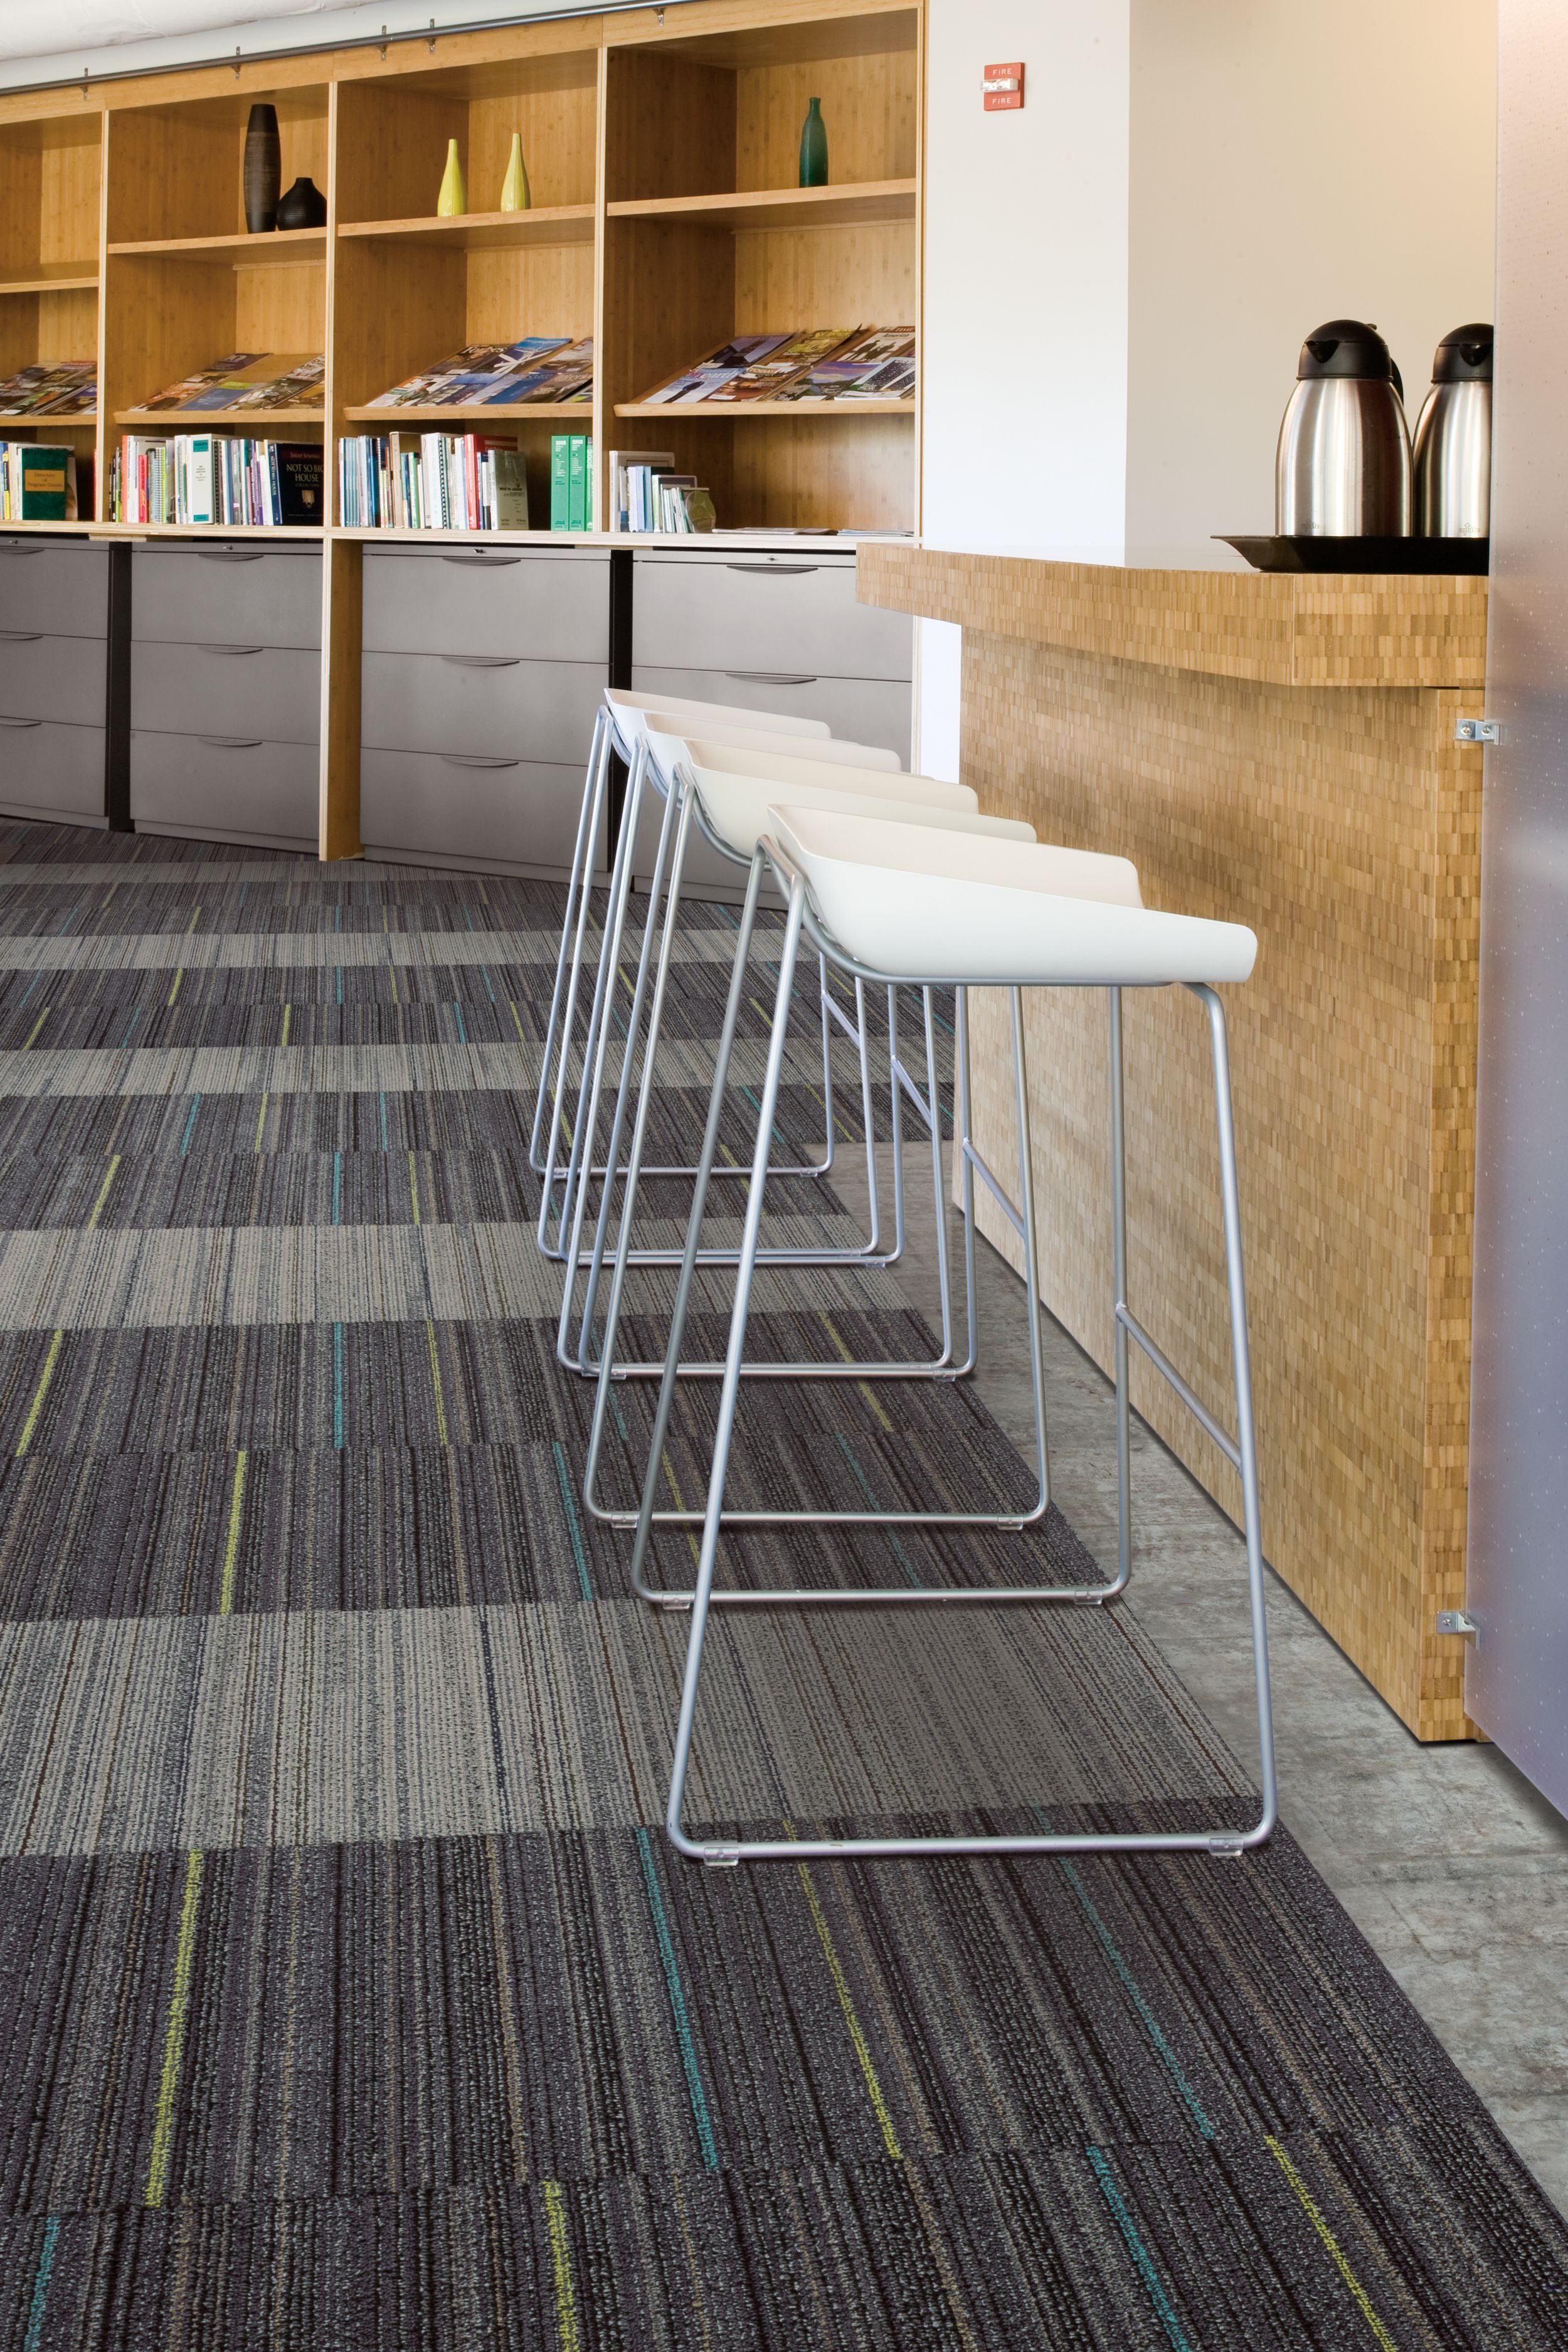 Interface Primary Stitch and Sew Straight carpet tile with Textured Stones LVT in cafe area with high top seating imagen número 6